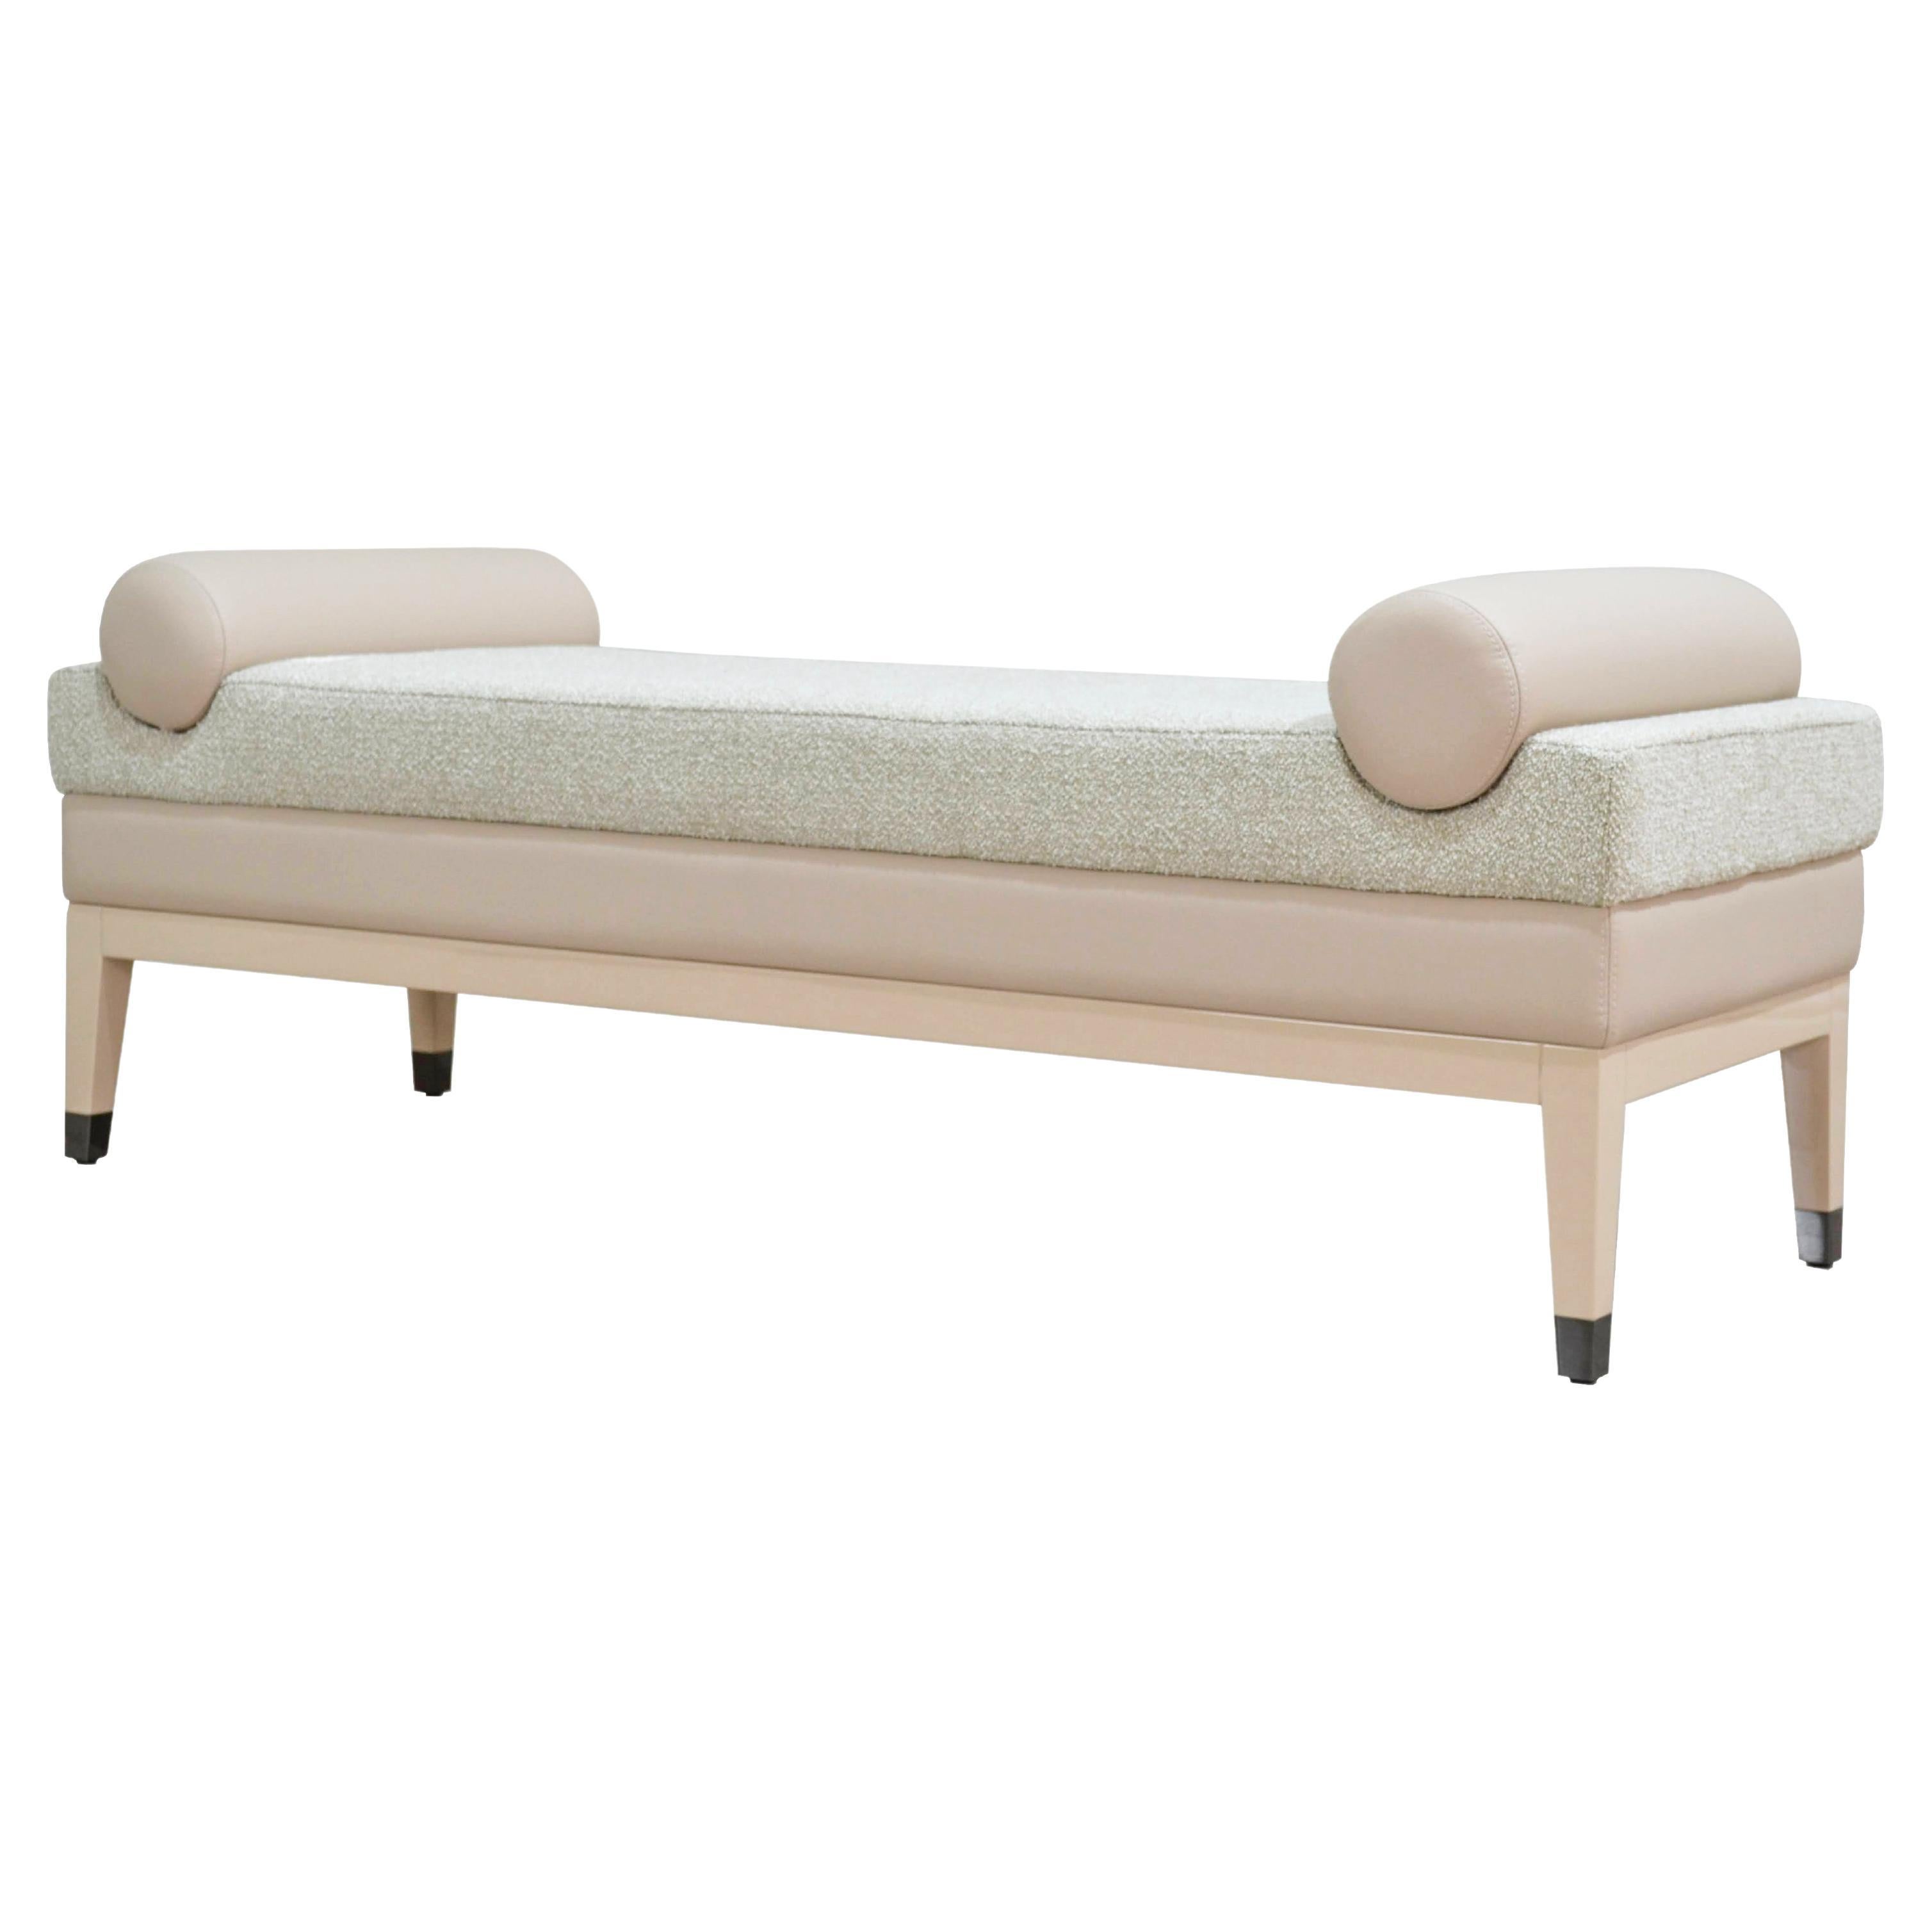 Italian Contemporary Upholstered Bench in Quinoa Fabric and Beige Leather For Sale